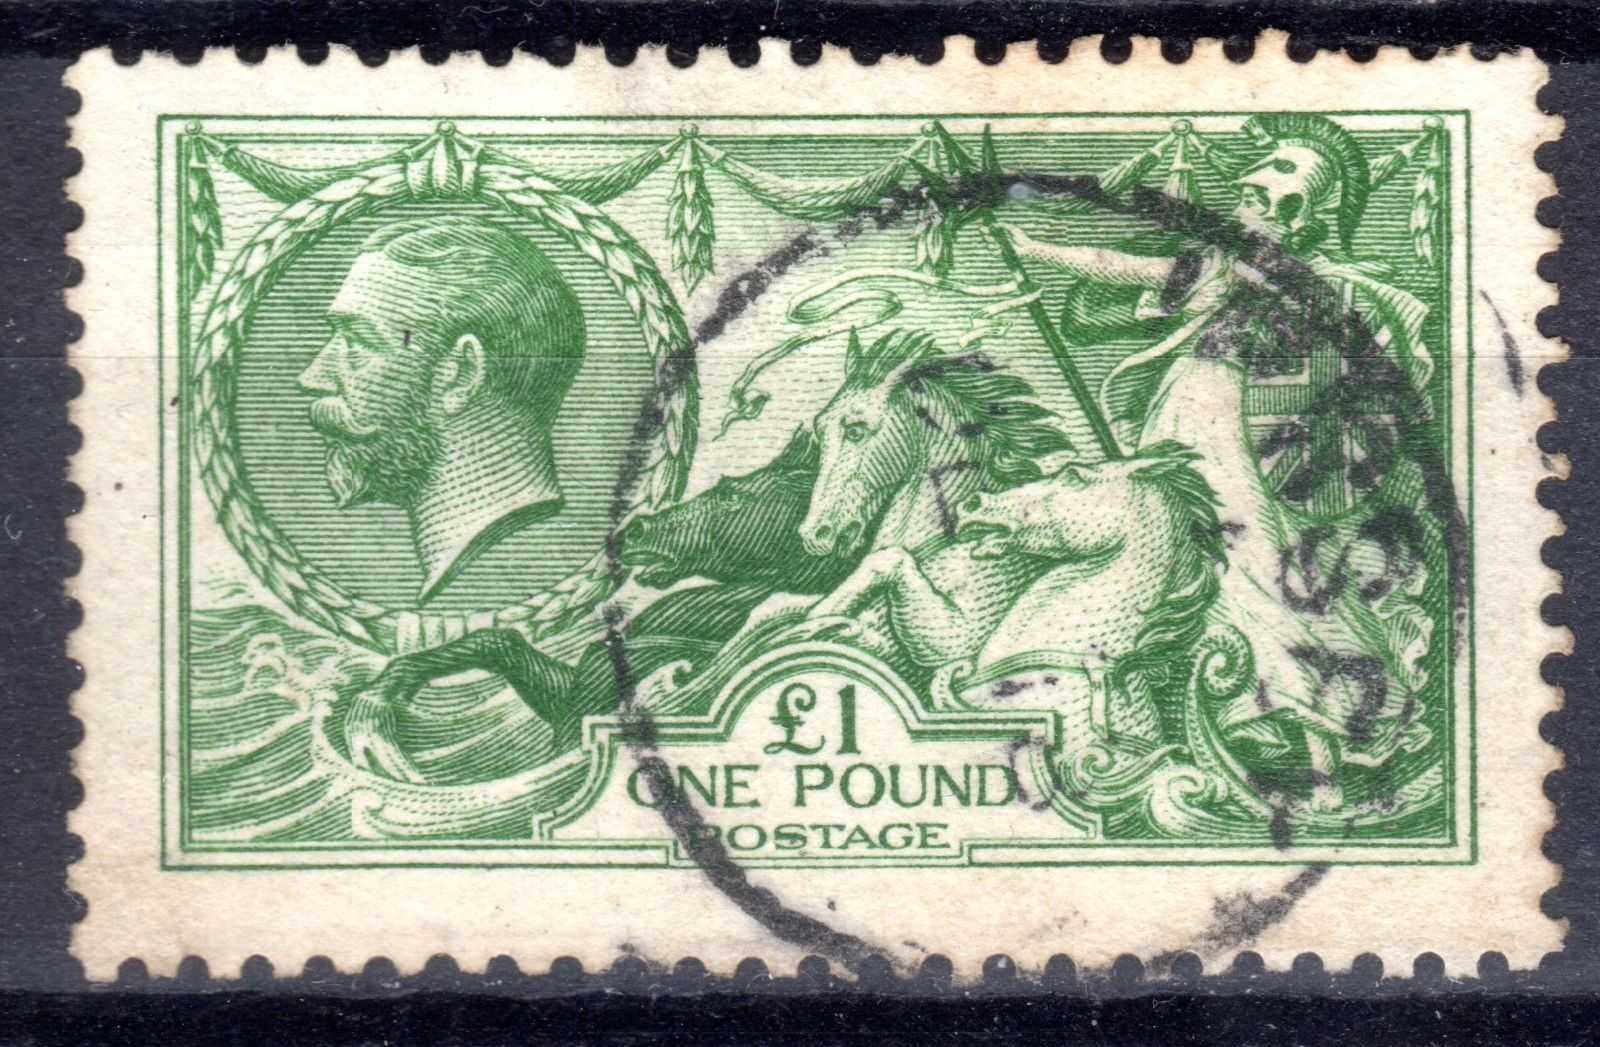 763VERY FINE USED SG404 GV 1 DULL BLUE GREEN SEAHORSE LIGHT JERSEY CANCEL